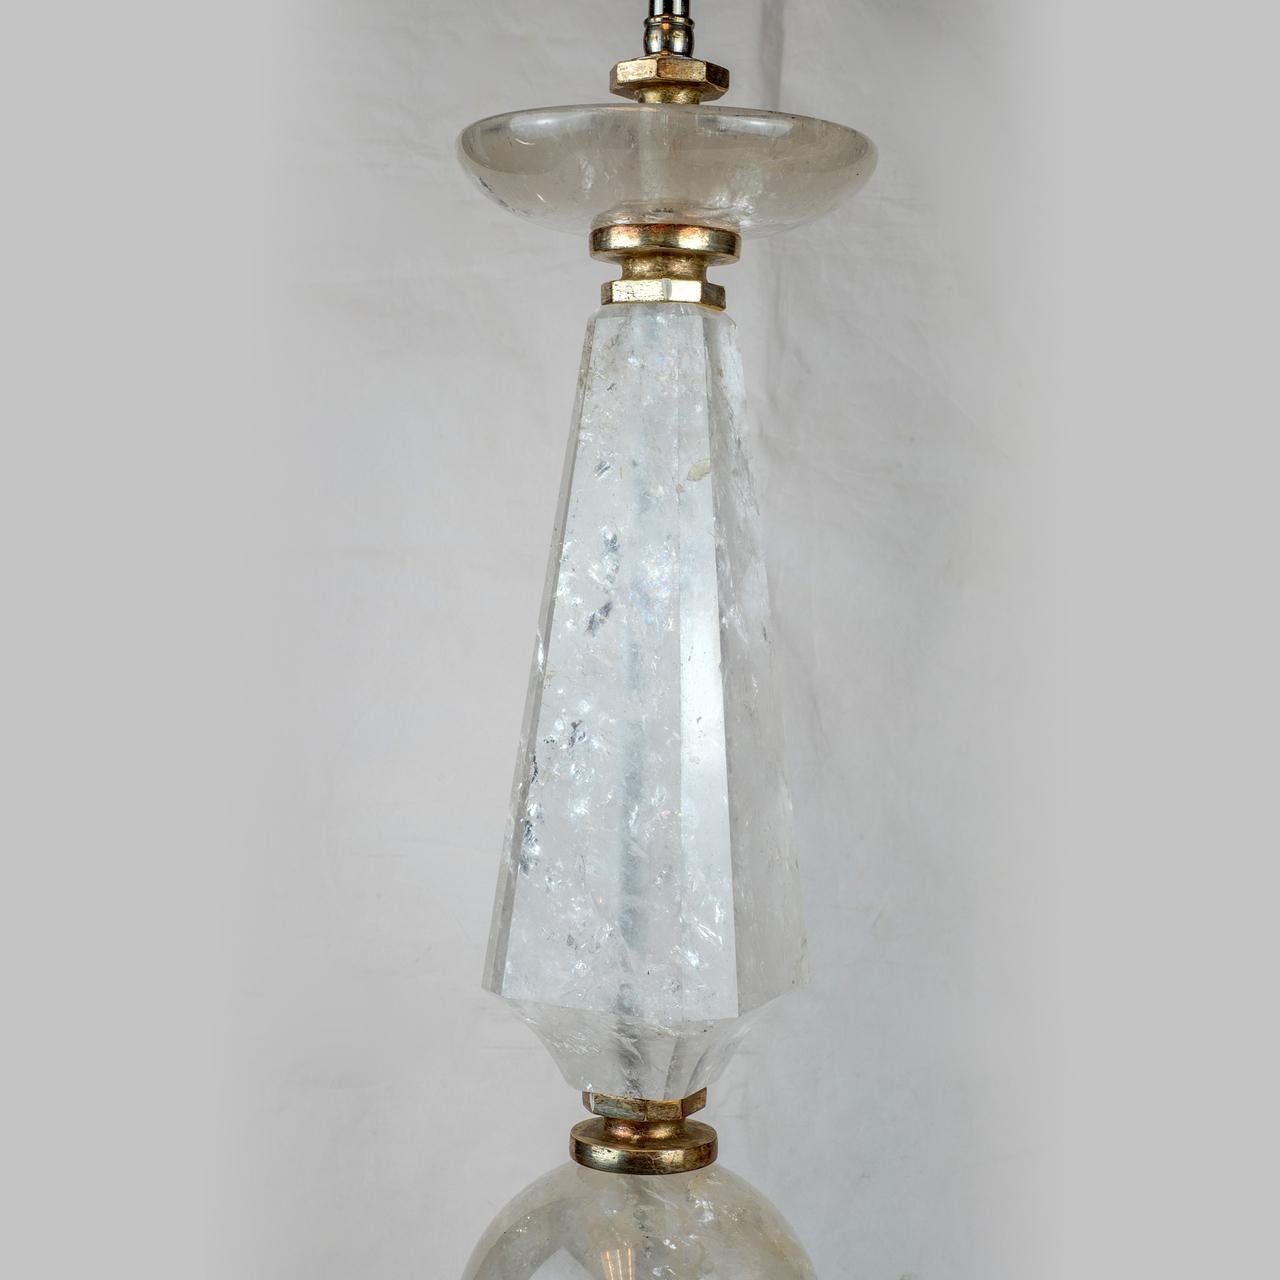 A fine pair of rock crystal and silvered wood accent table lamps with geometric rock crystal designs.

Origin: French
Date: Early 20th century
Dimension: 33 in x 7 1/4 in x 7 1/4 in.
